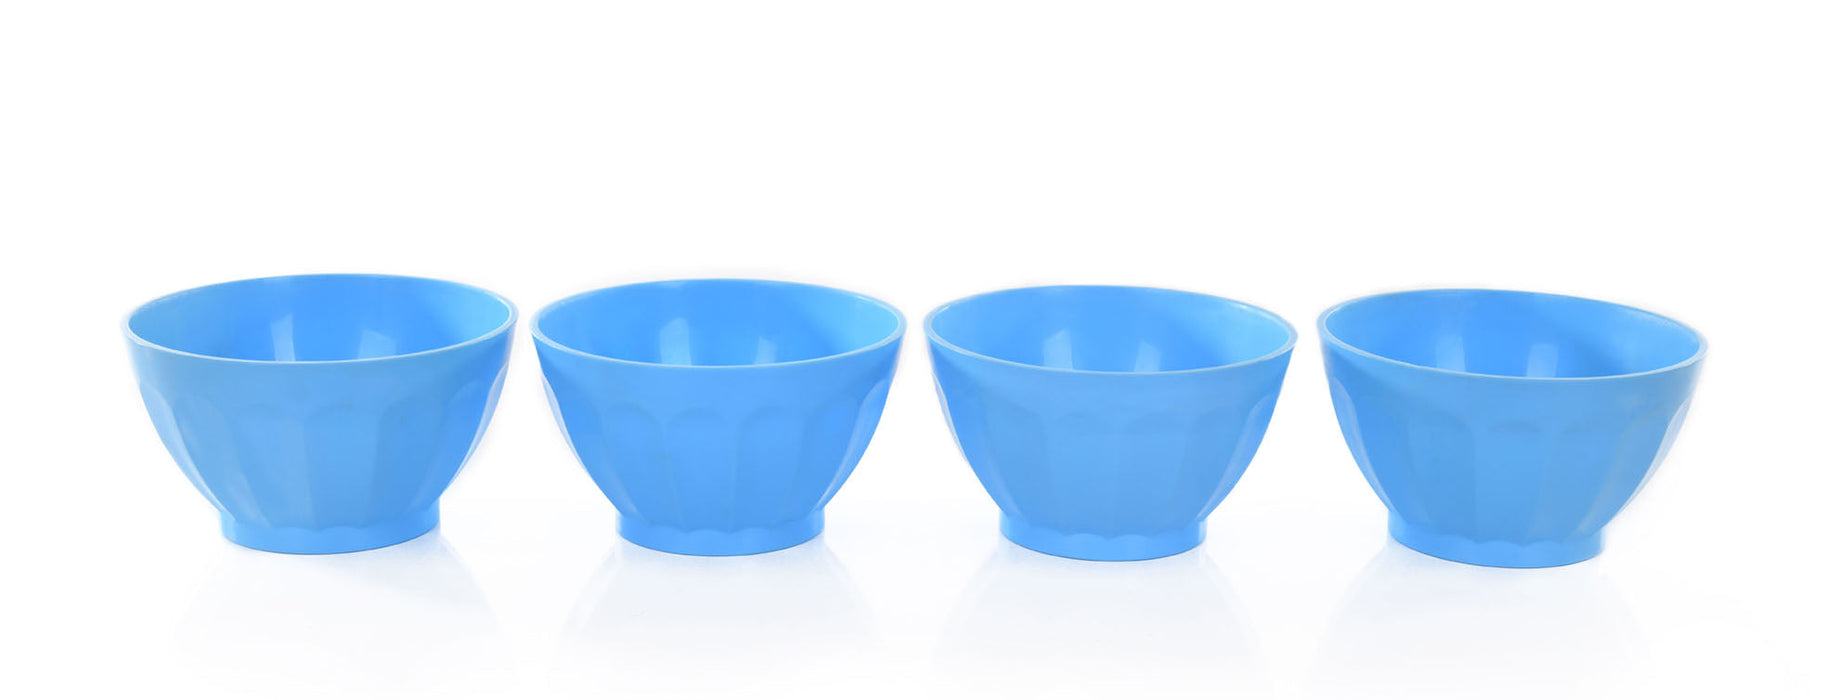 Mintra Unbreakable Plastic Bowl - 4 Pack Medium 750ml - Mintra USA mintra-unbreakable-plastic-bowl-4-pack-medium-750ml/plastic cereal bowls dishwasher and microwave safe